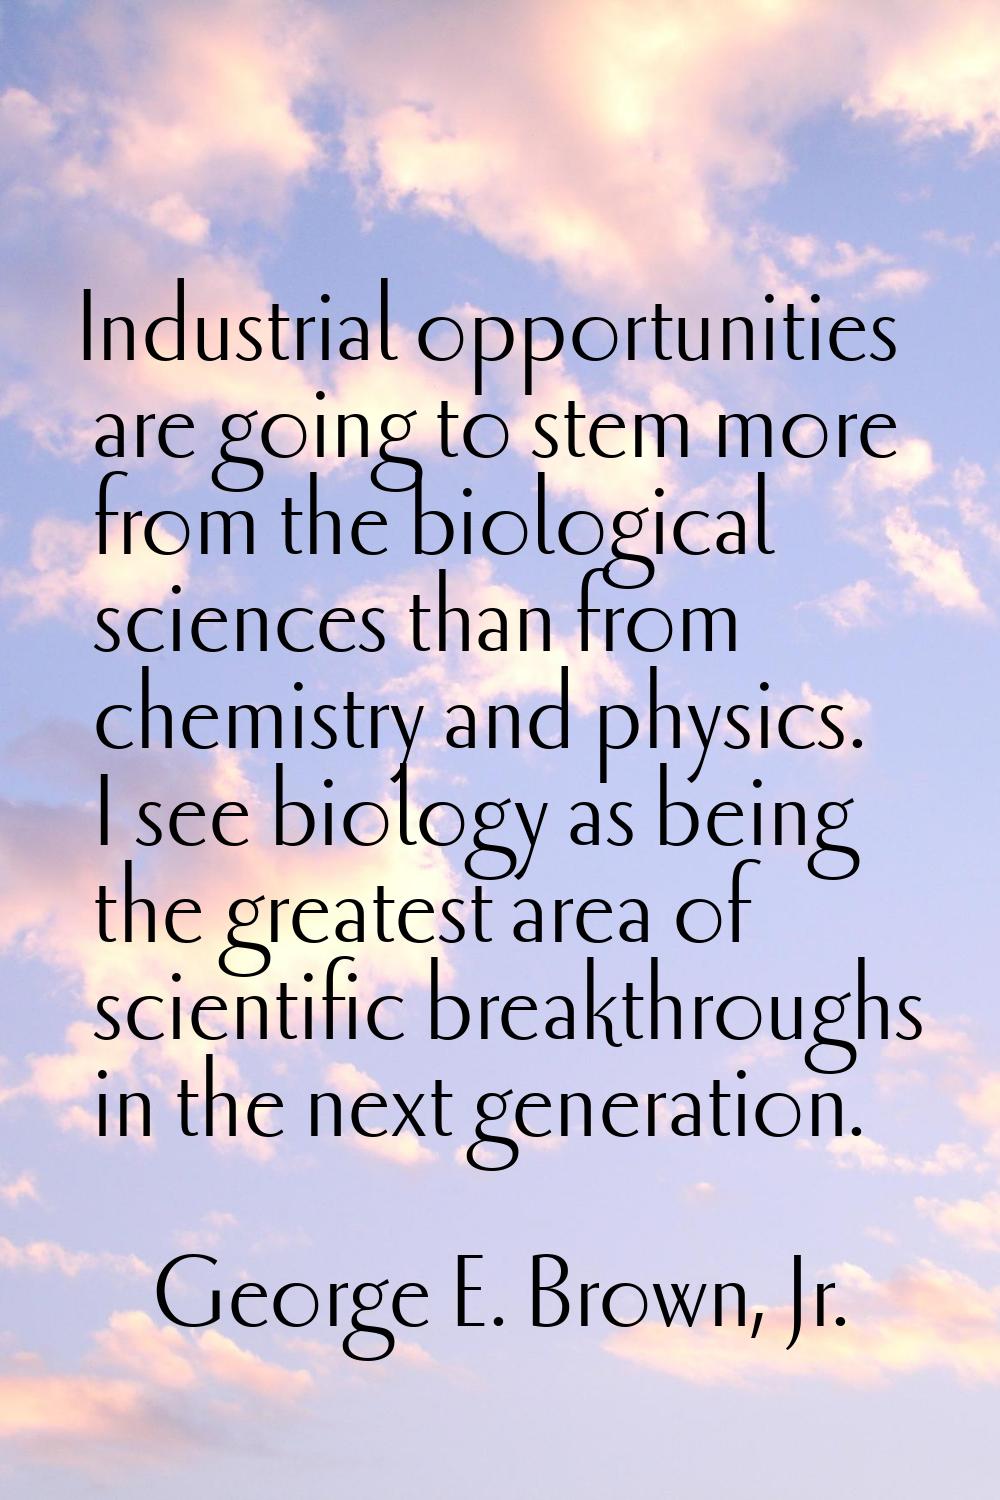 Industrial opportunities are going to stem more from the biological sciences than from chemistry an